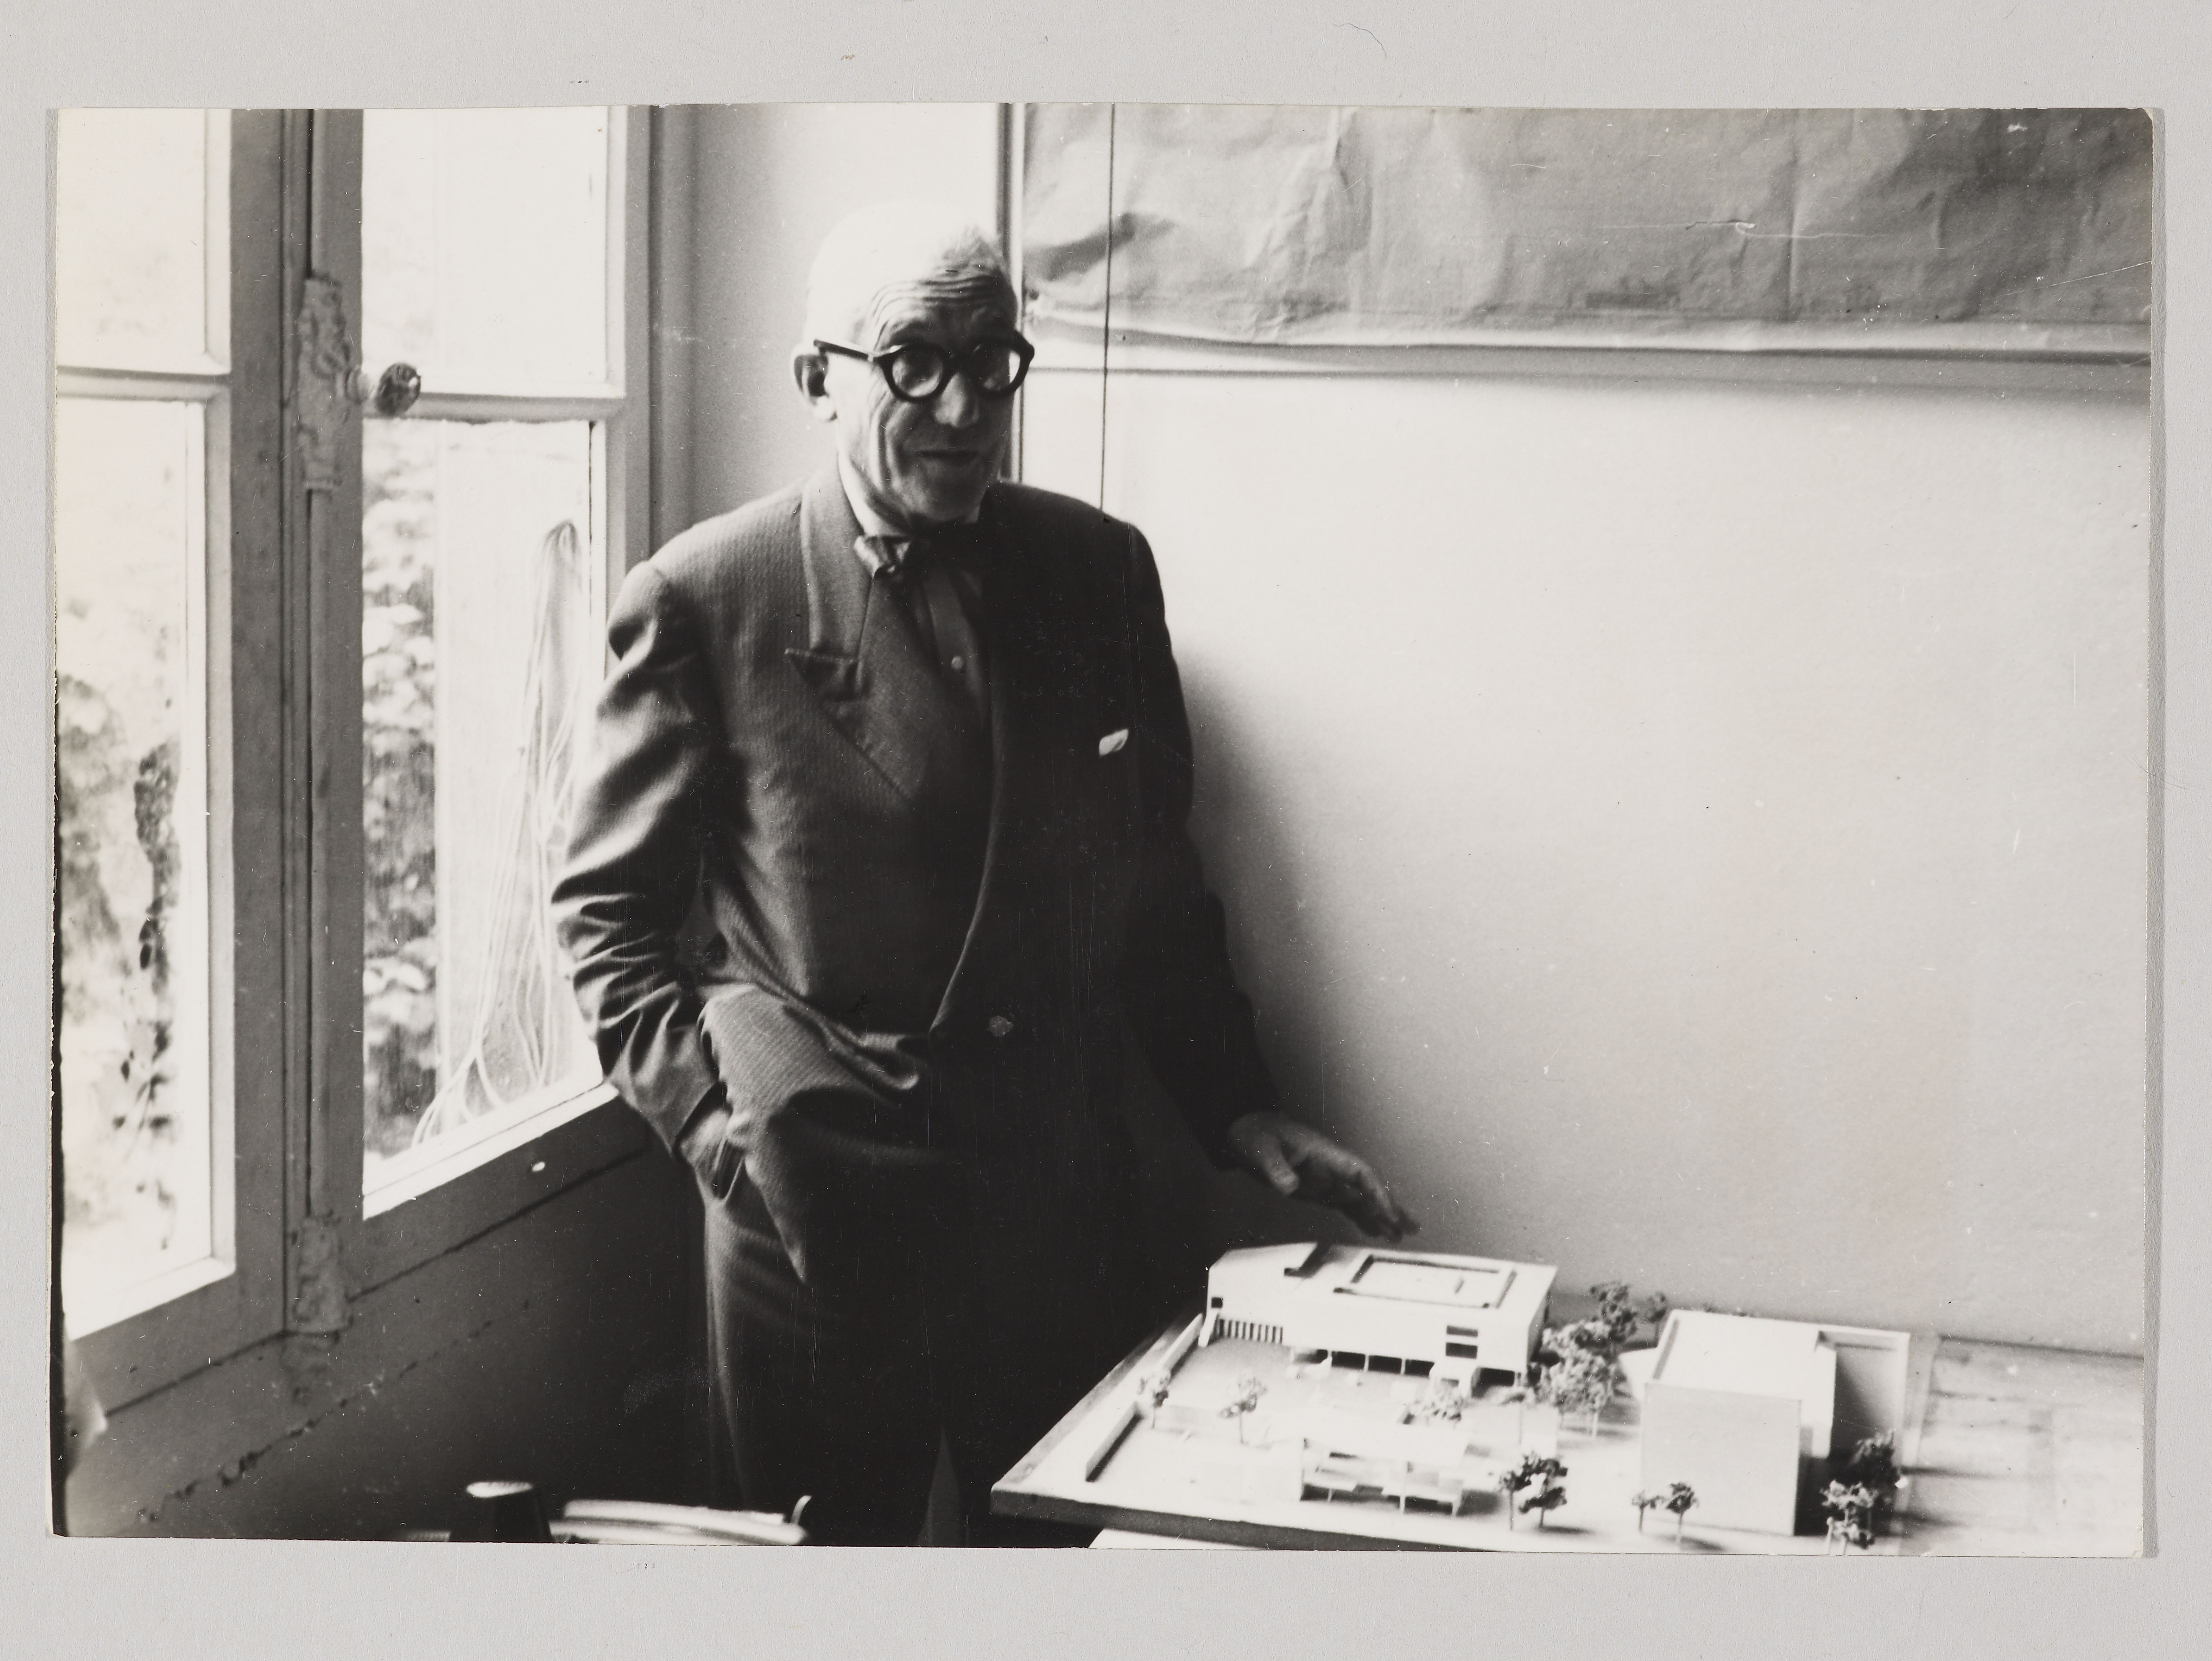 image: Le Corbusier with a model of the National Museum of Western Art, 1956